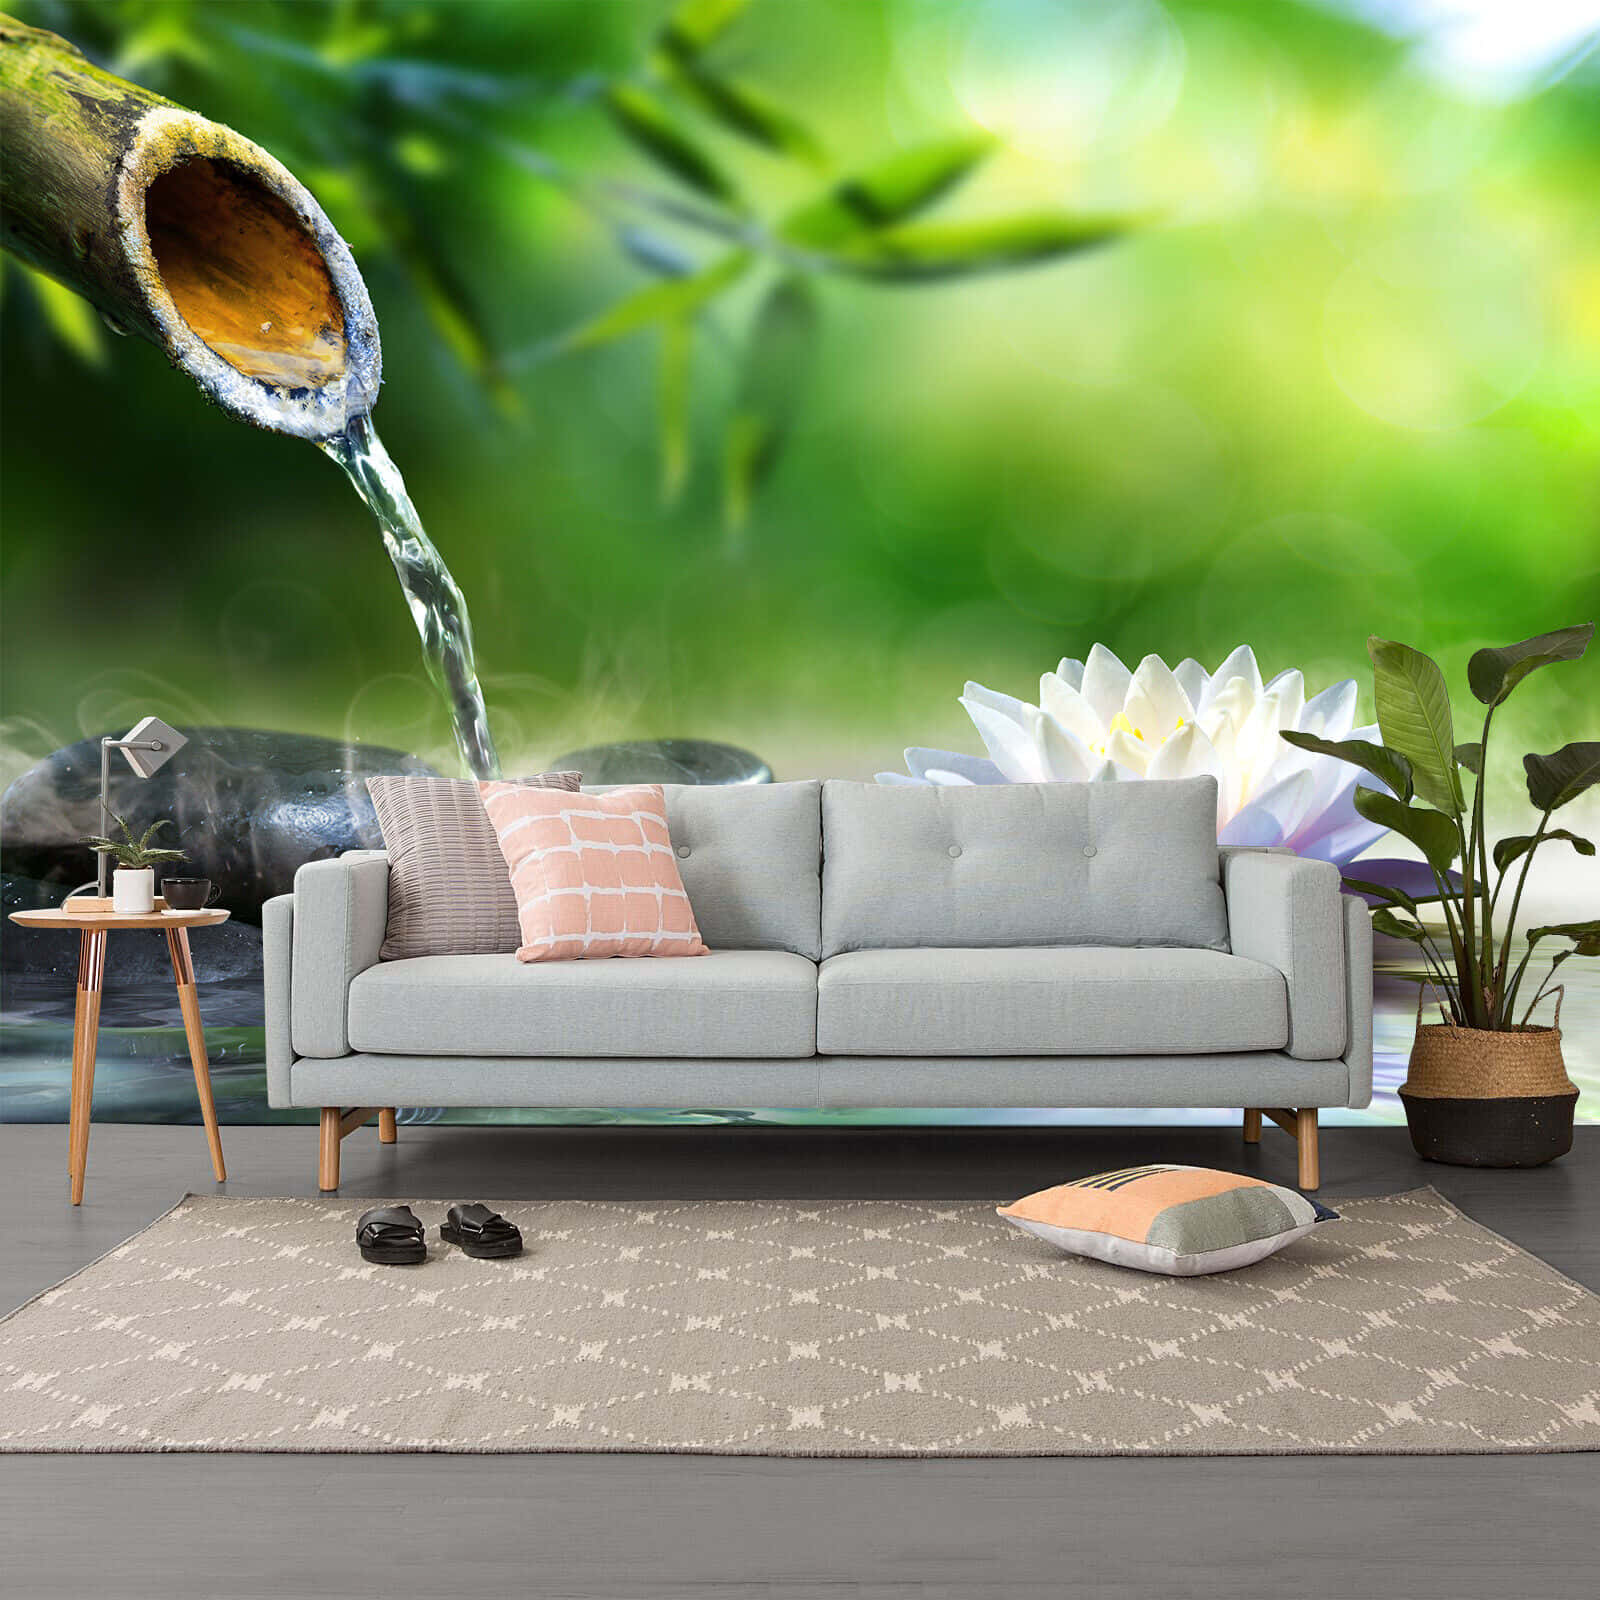 Download Natural-looking Couch Nature Background Wallpaper 